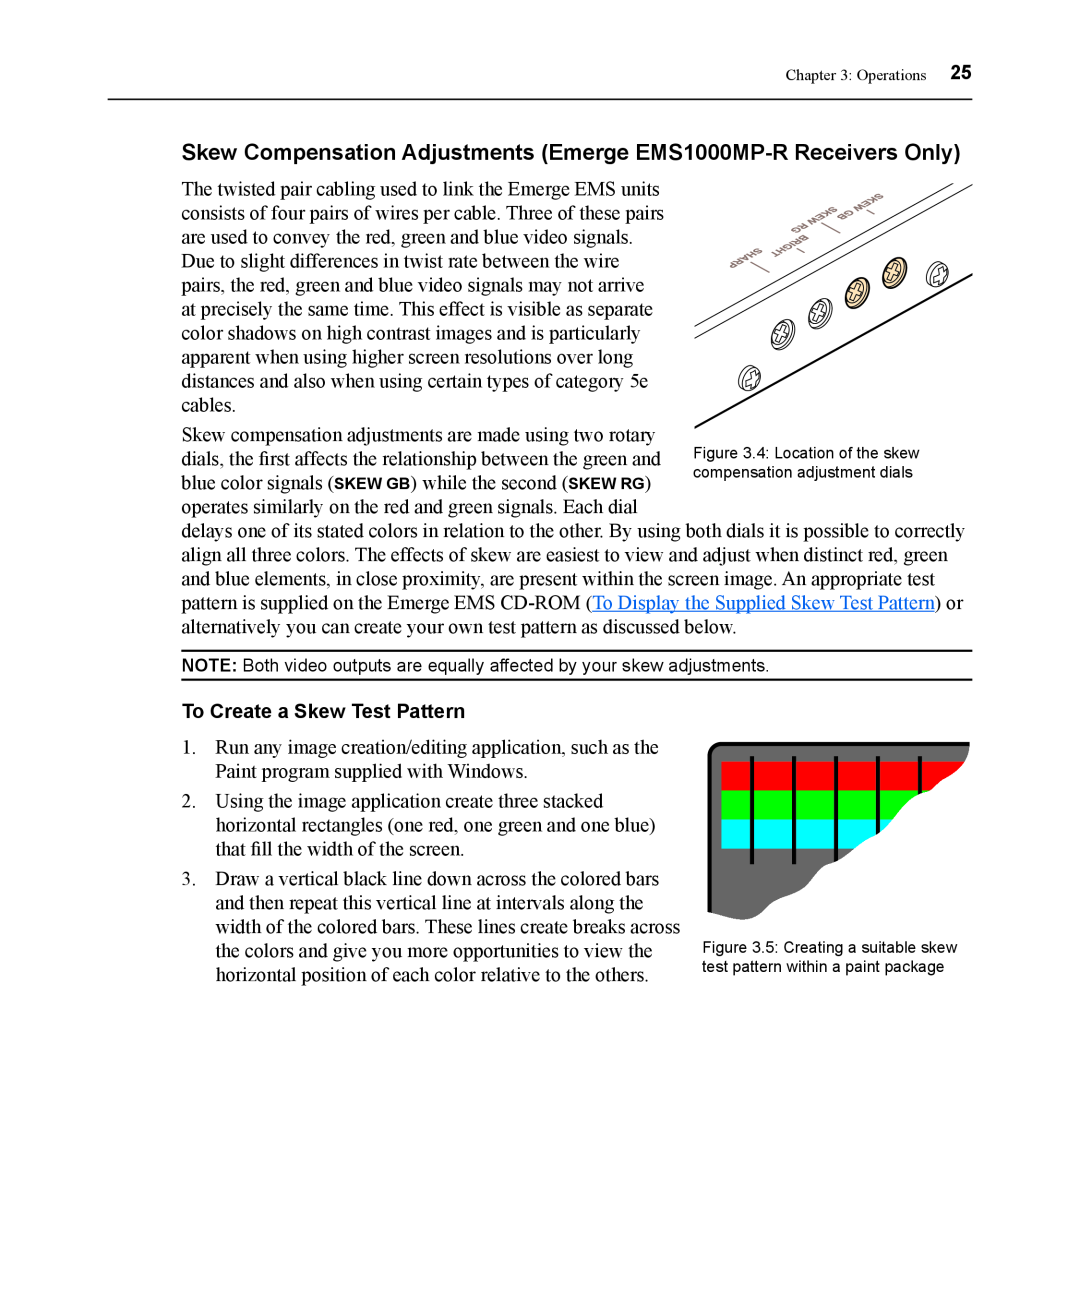 Avocent EMS1000P manual To Create a Skew Test Pattern, Operations 